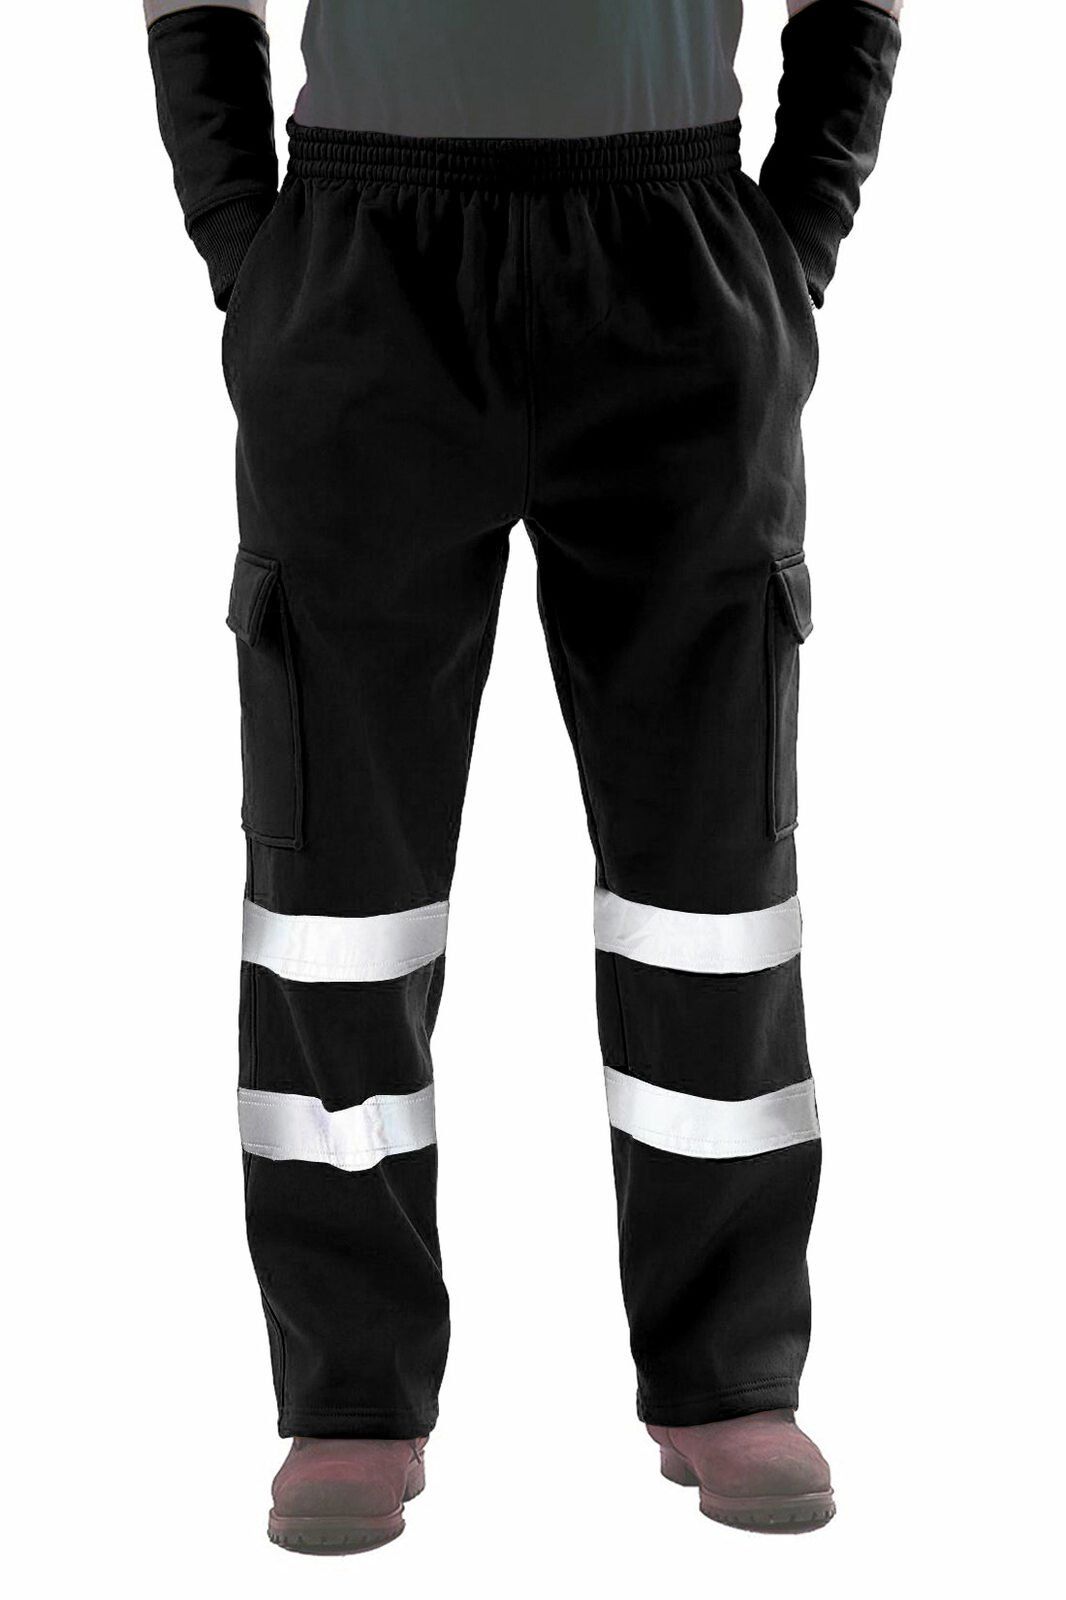 [25% OFF] 2021 Reflective Stripe Work Safety Casual Pants In BLACK